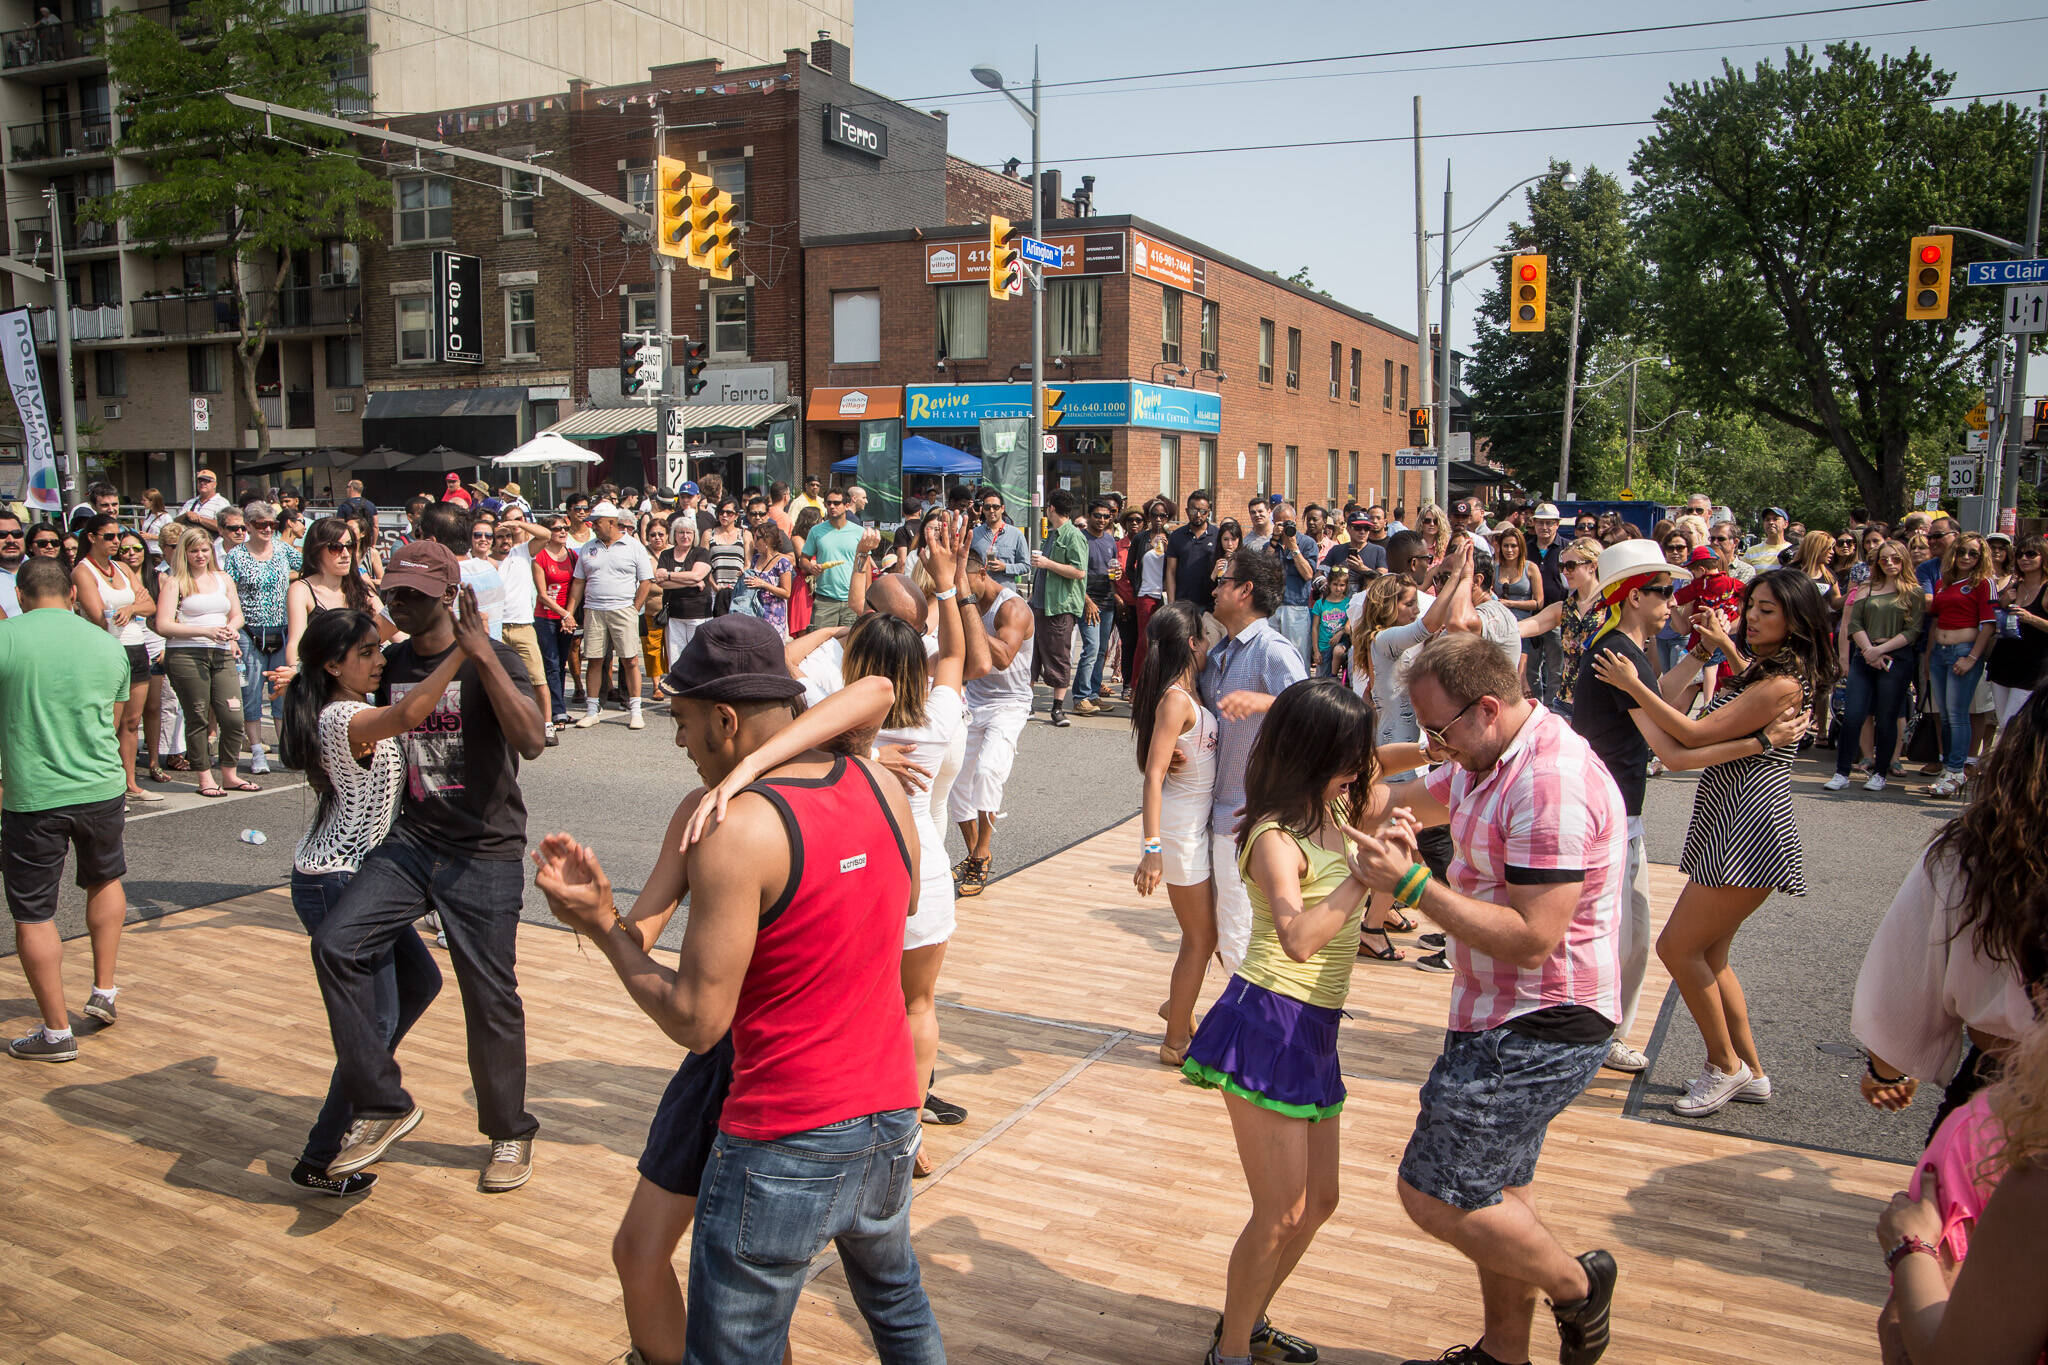 Salsa on St. Clair is coming back to Toronto this summer